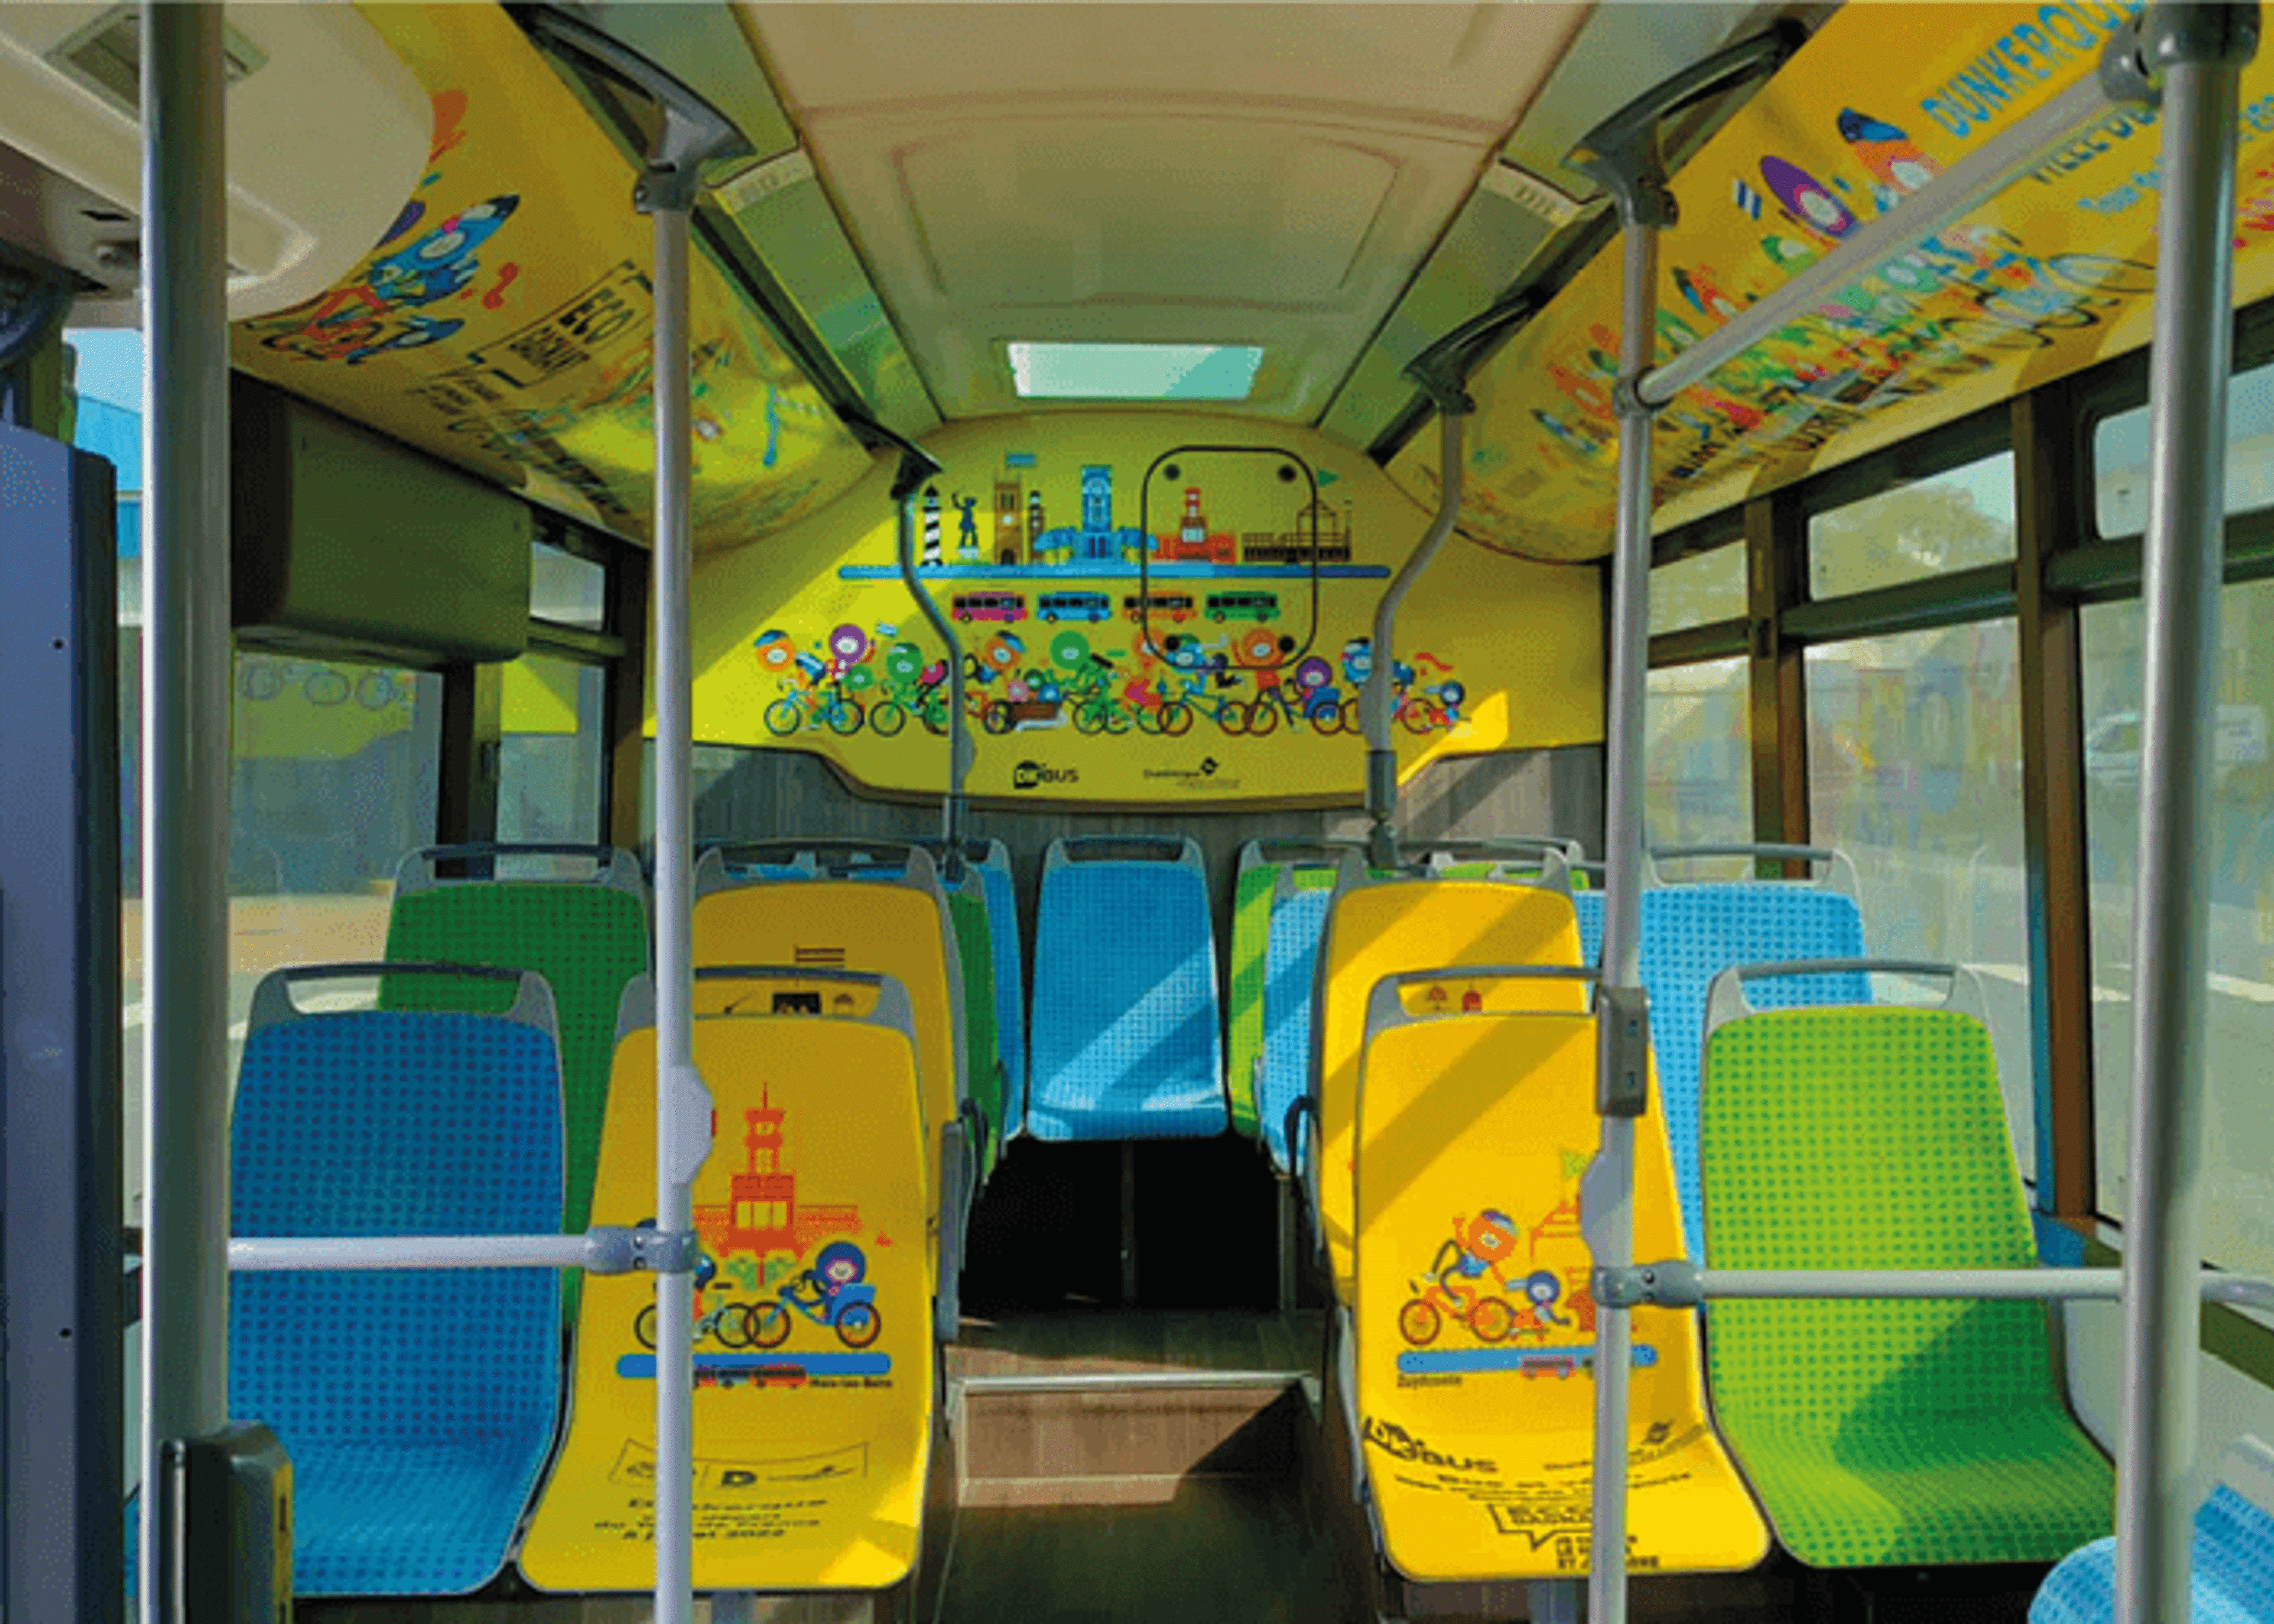 Camira Print fabric featured on Tour de France buses